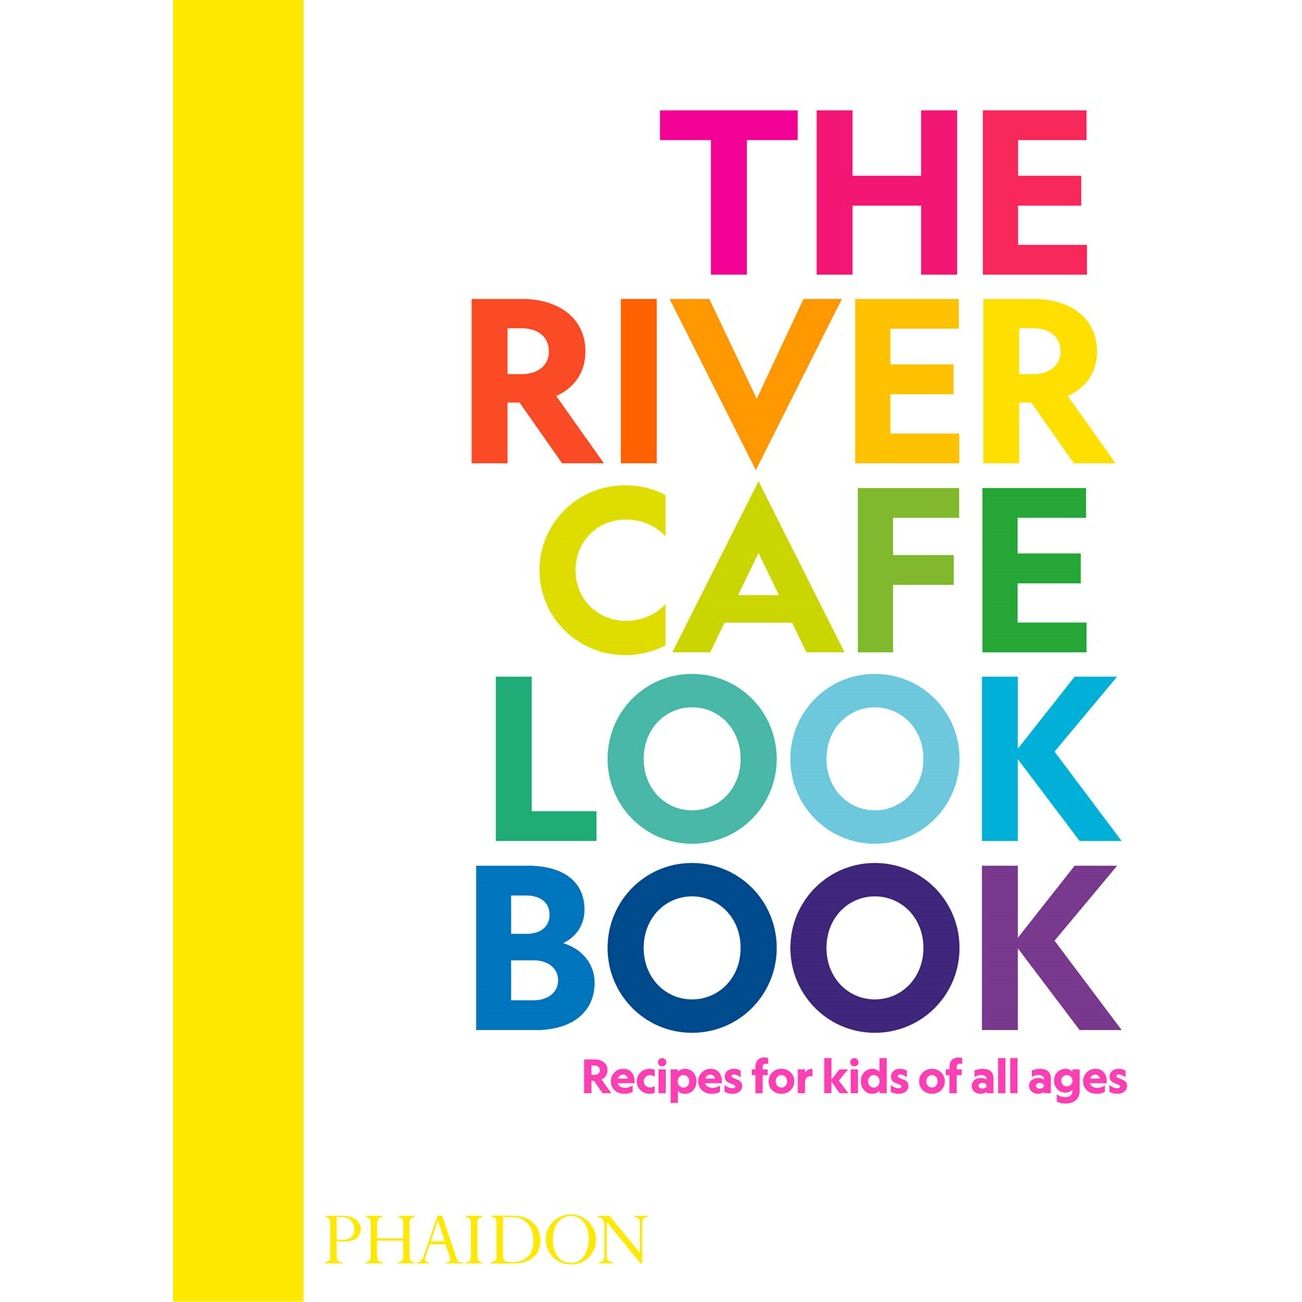 The River Café Cookbook for Kids (Ruth Rogers)